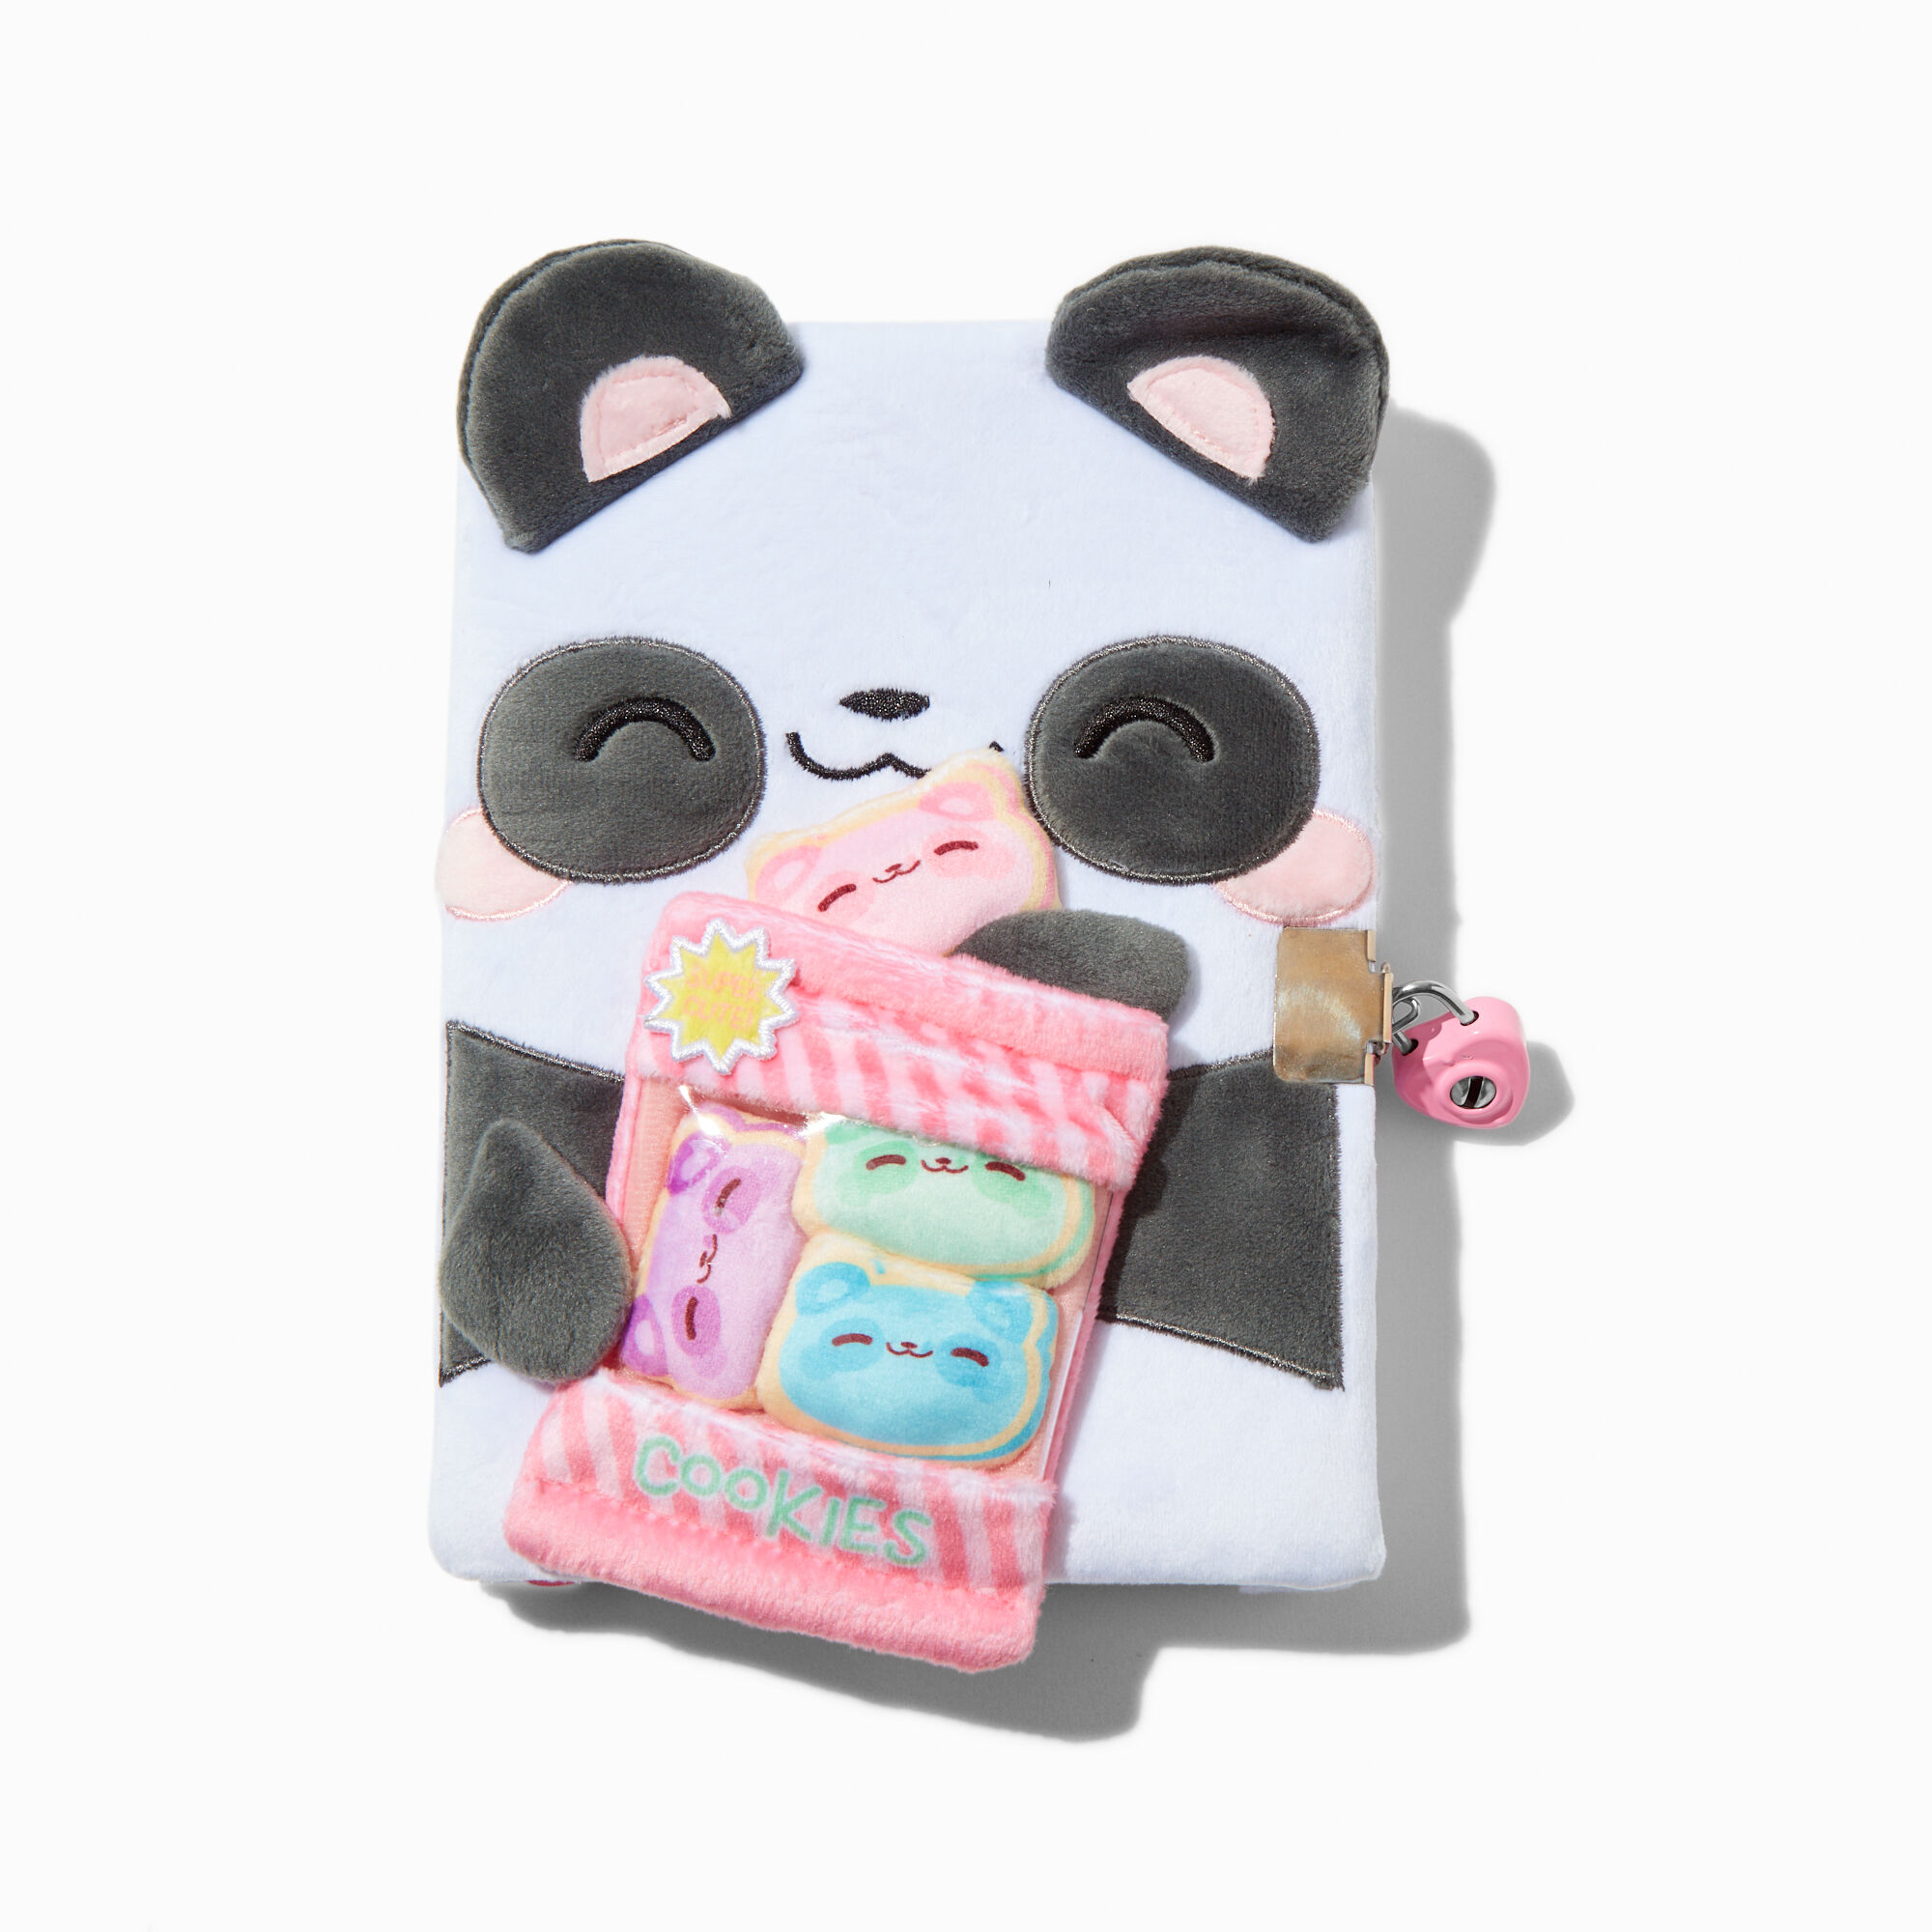 View Claires Panda Cookies Plush Lock Diary information